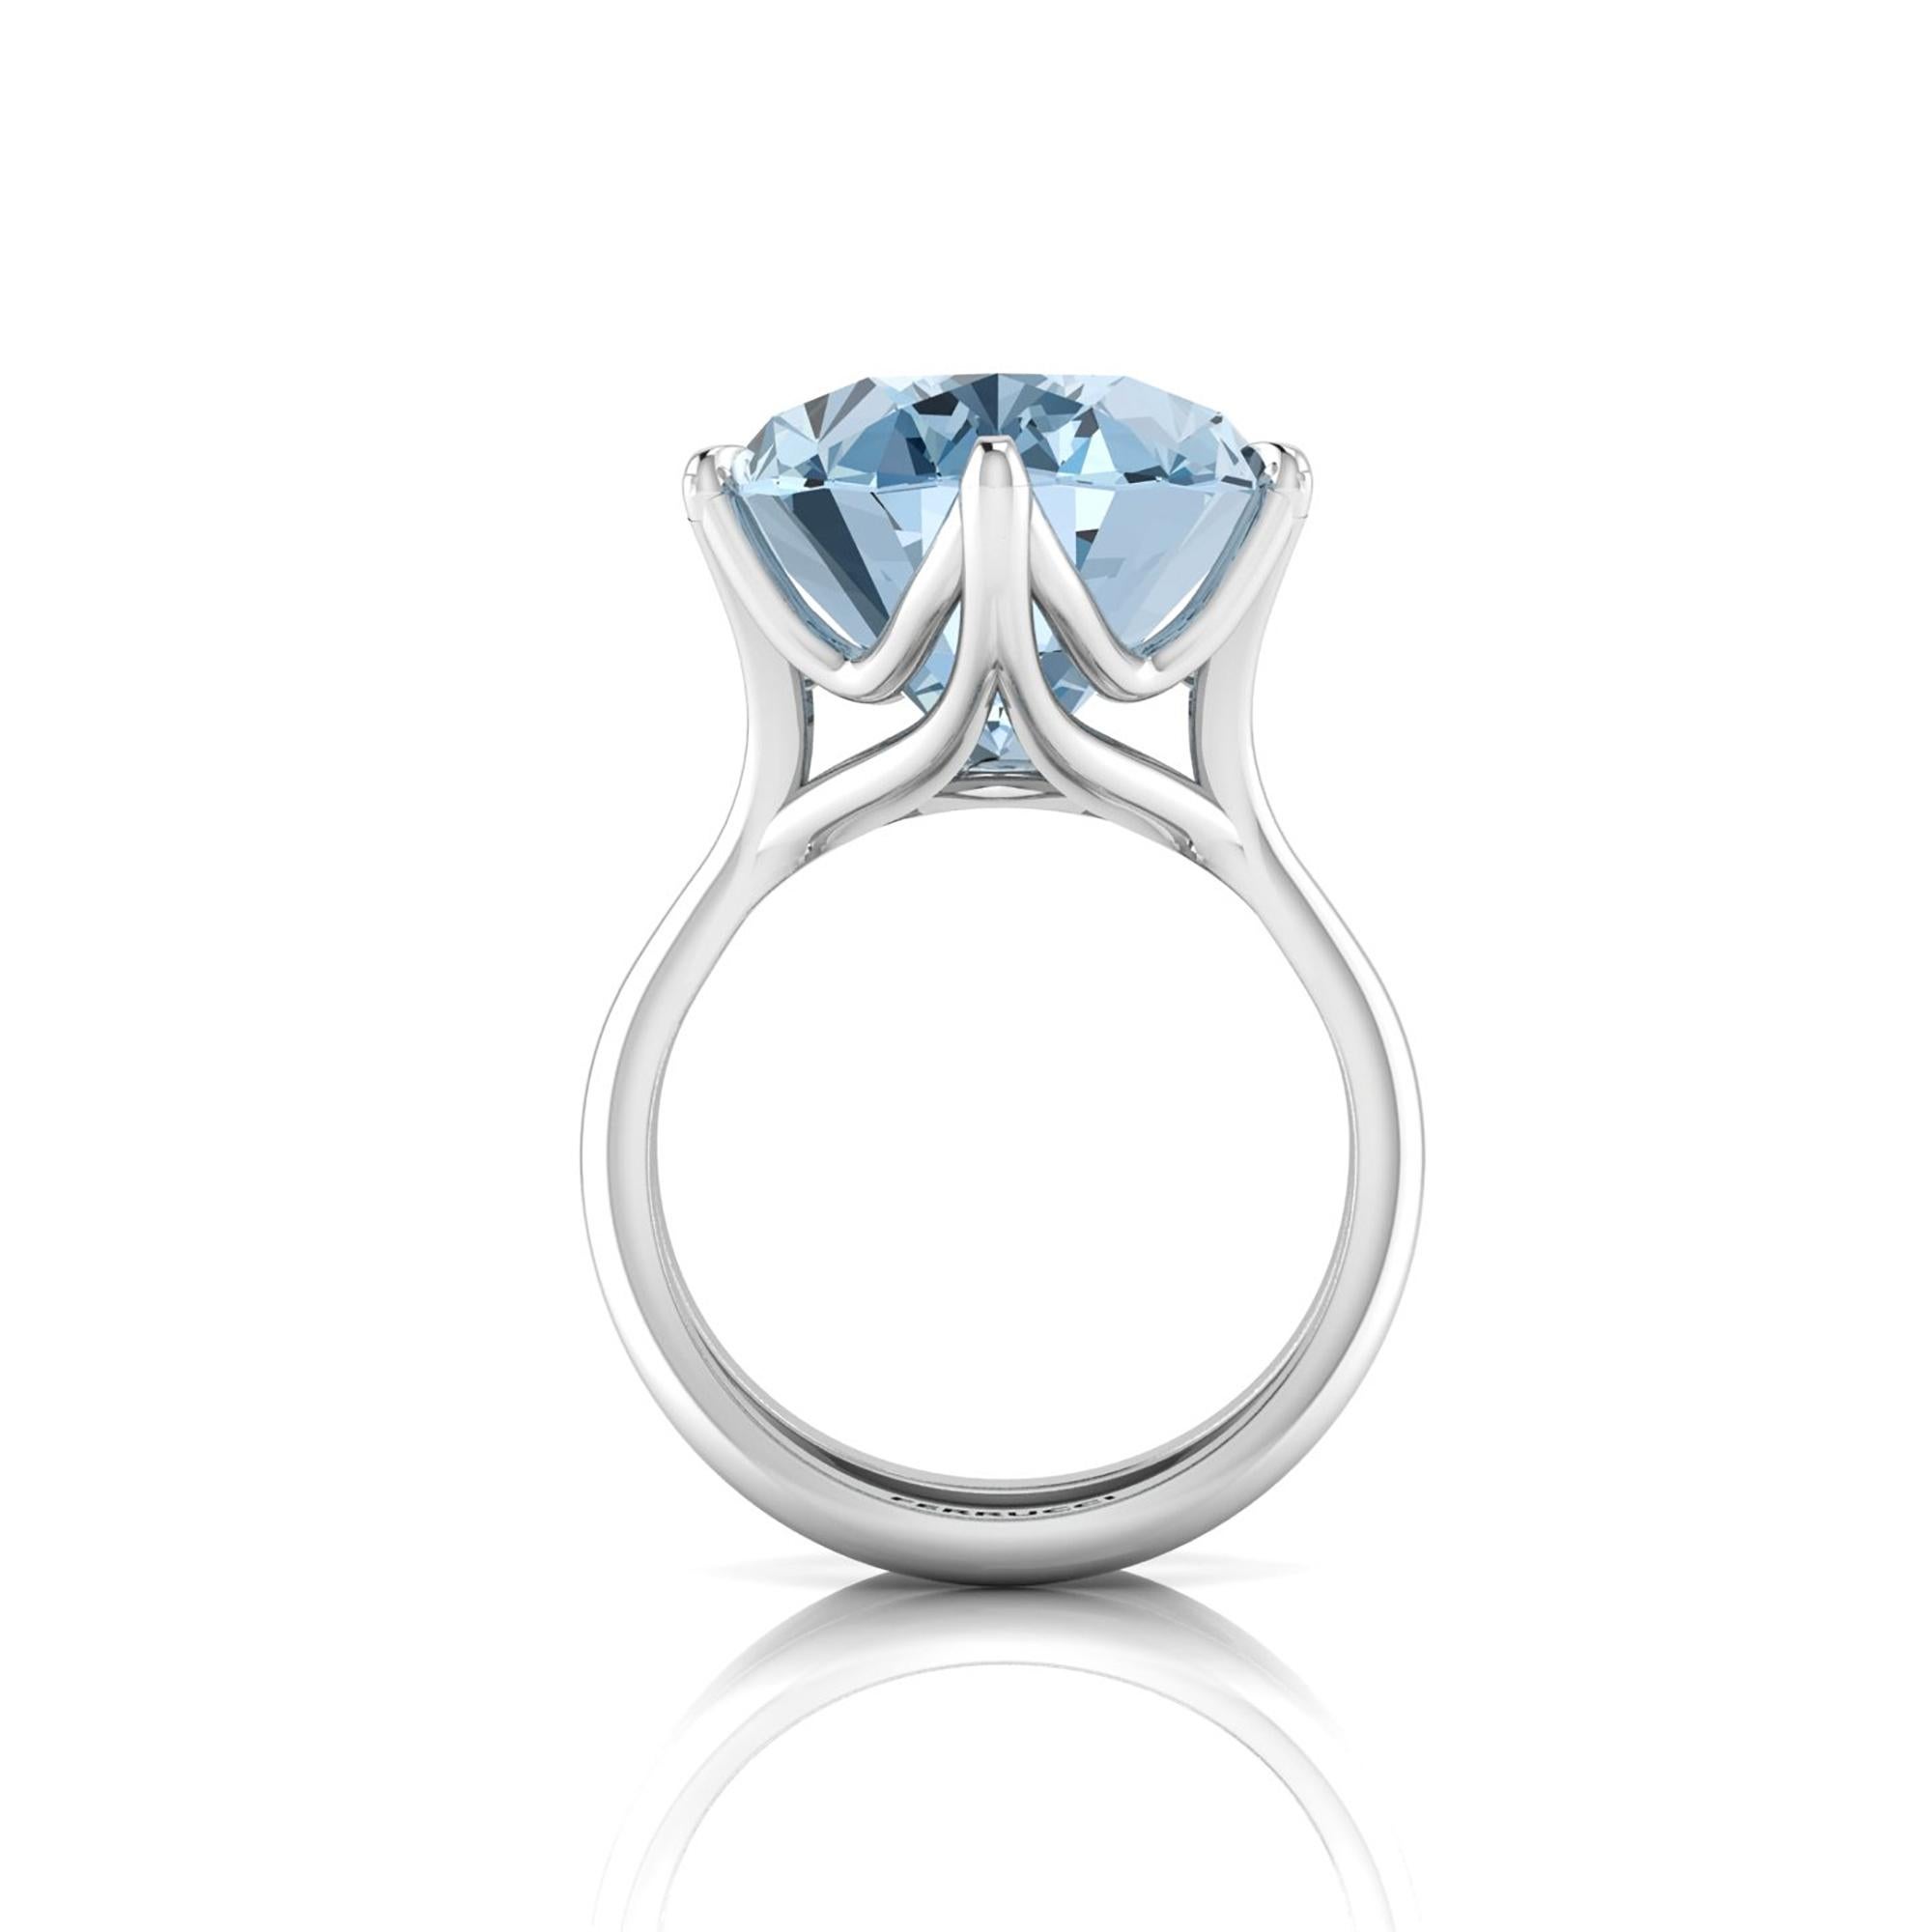 An approximate stunning 13.05 carat Oval Aquamarine, set in a uniquely designed  18k white gold ring, made with the best Italian craftsmanship,  a splendid blue mineral.
Entirely made in New York City a unique piece of art, Aquamarine encourages the